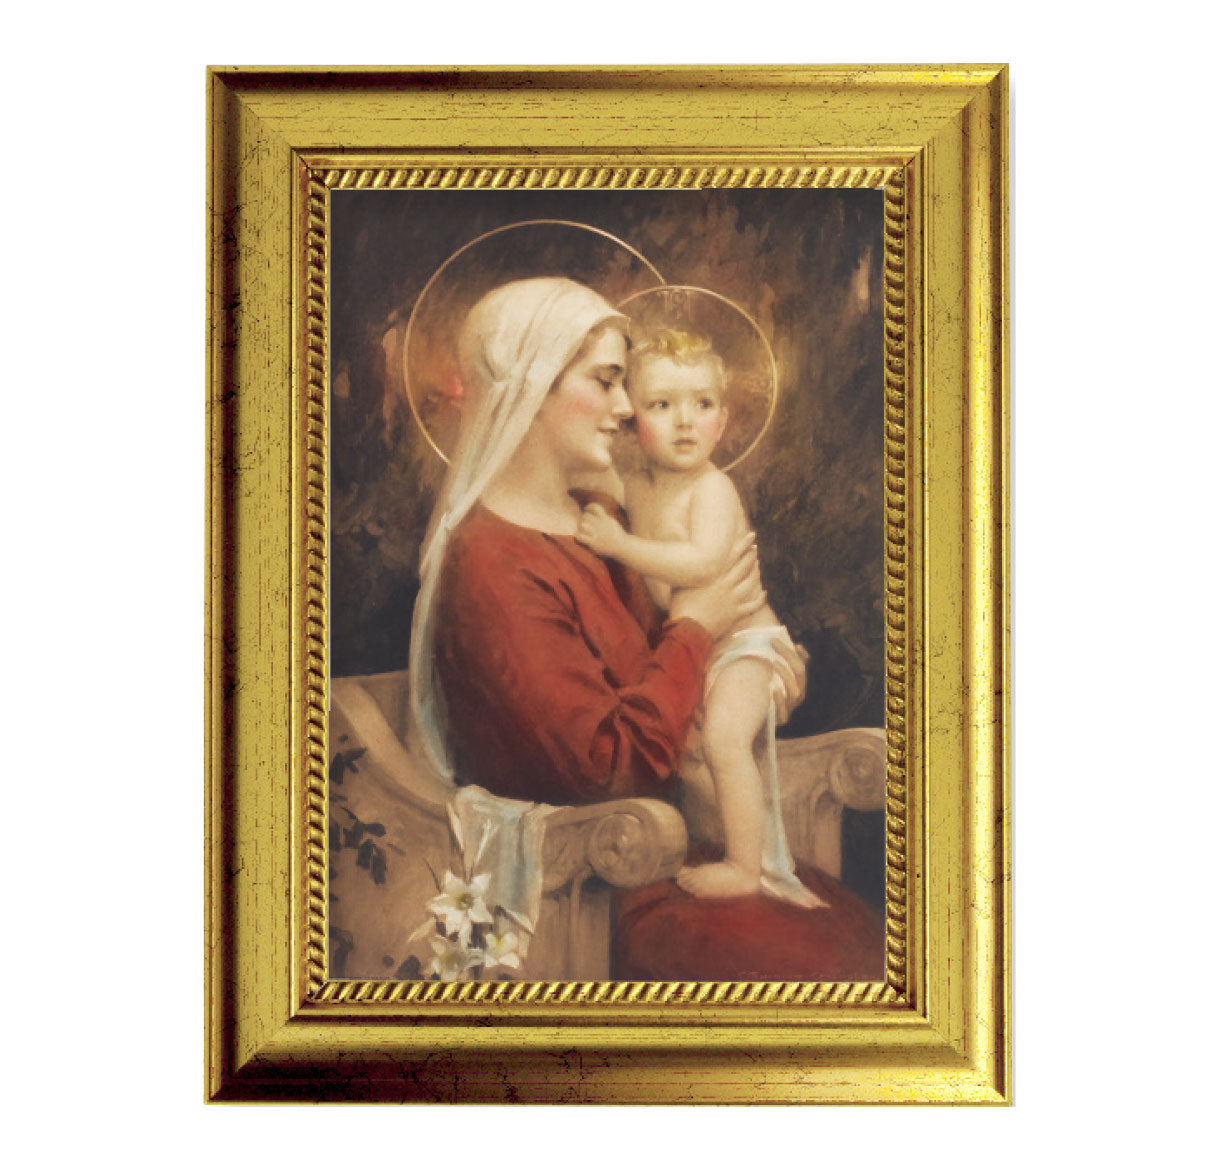 Madonna and Child Picture Framed Wall Art Decor, Small, Antique Gold-Leaf Frame with Rope Detailed Lip